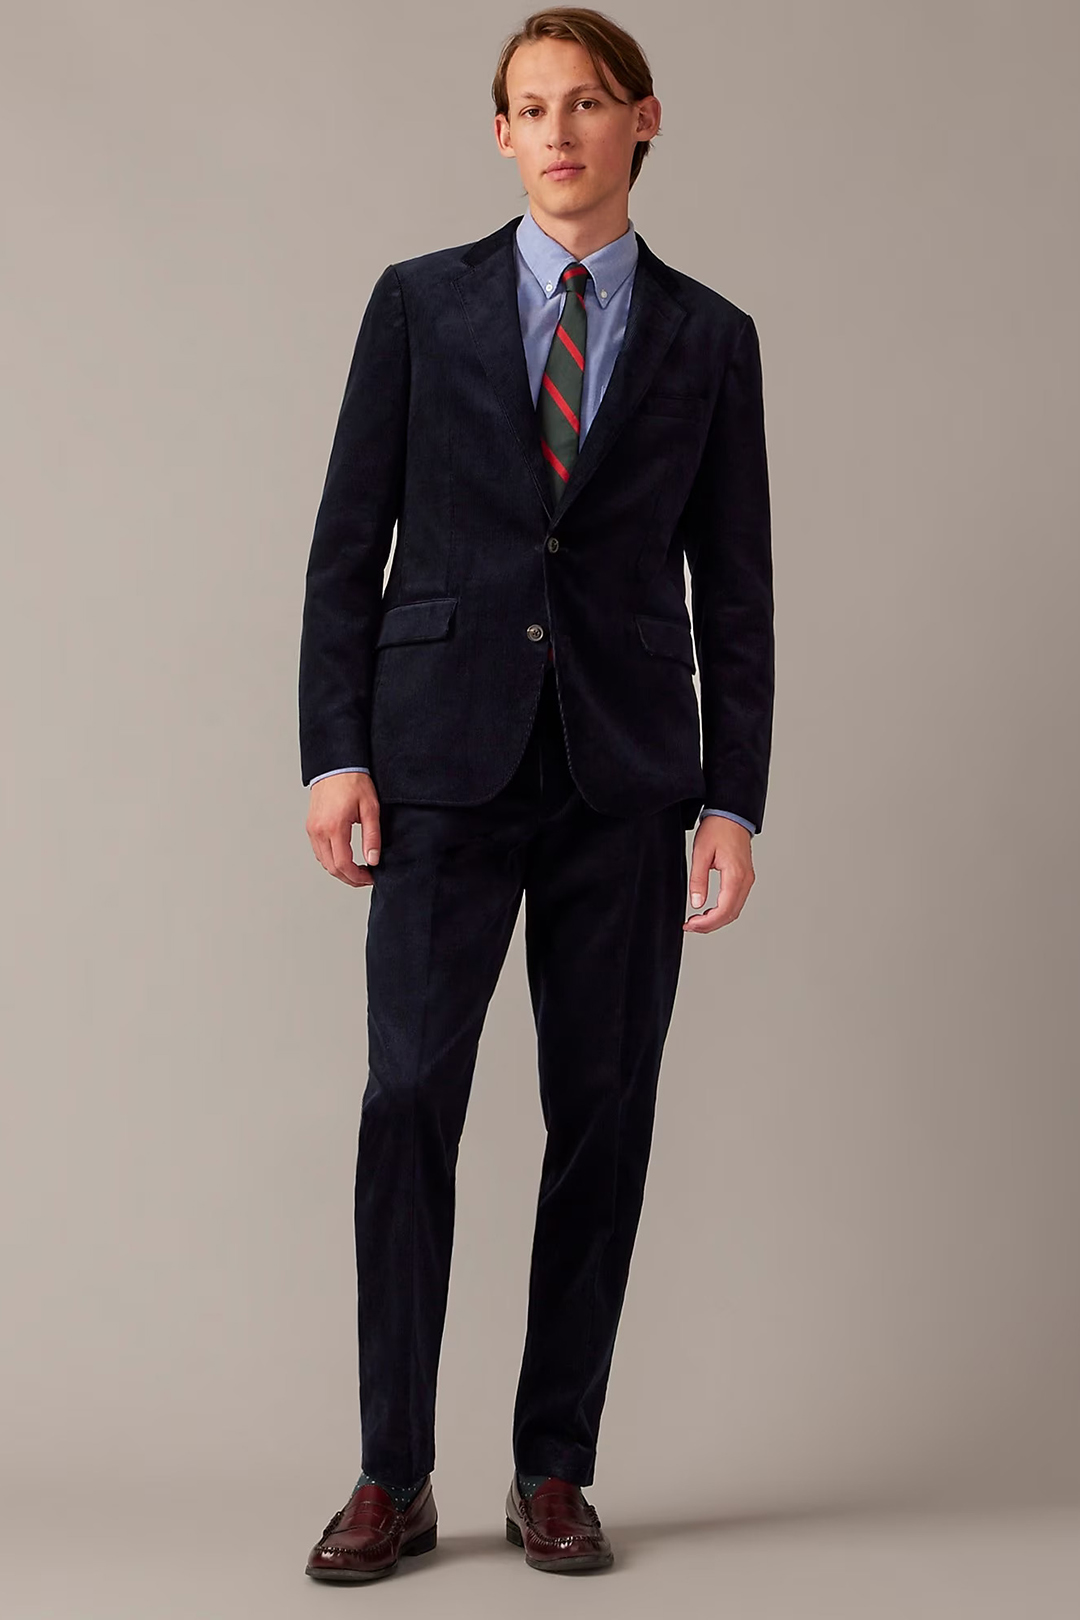 Navy corduroy suit, blue button-down shirt, green and red striped tie, and oxblood penny loafers outfit